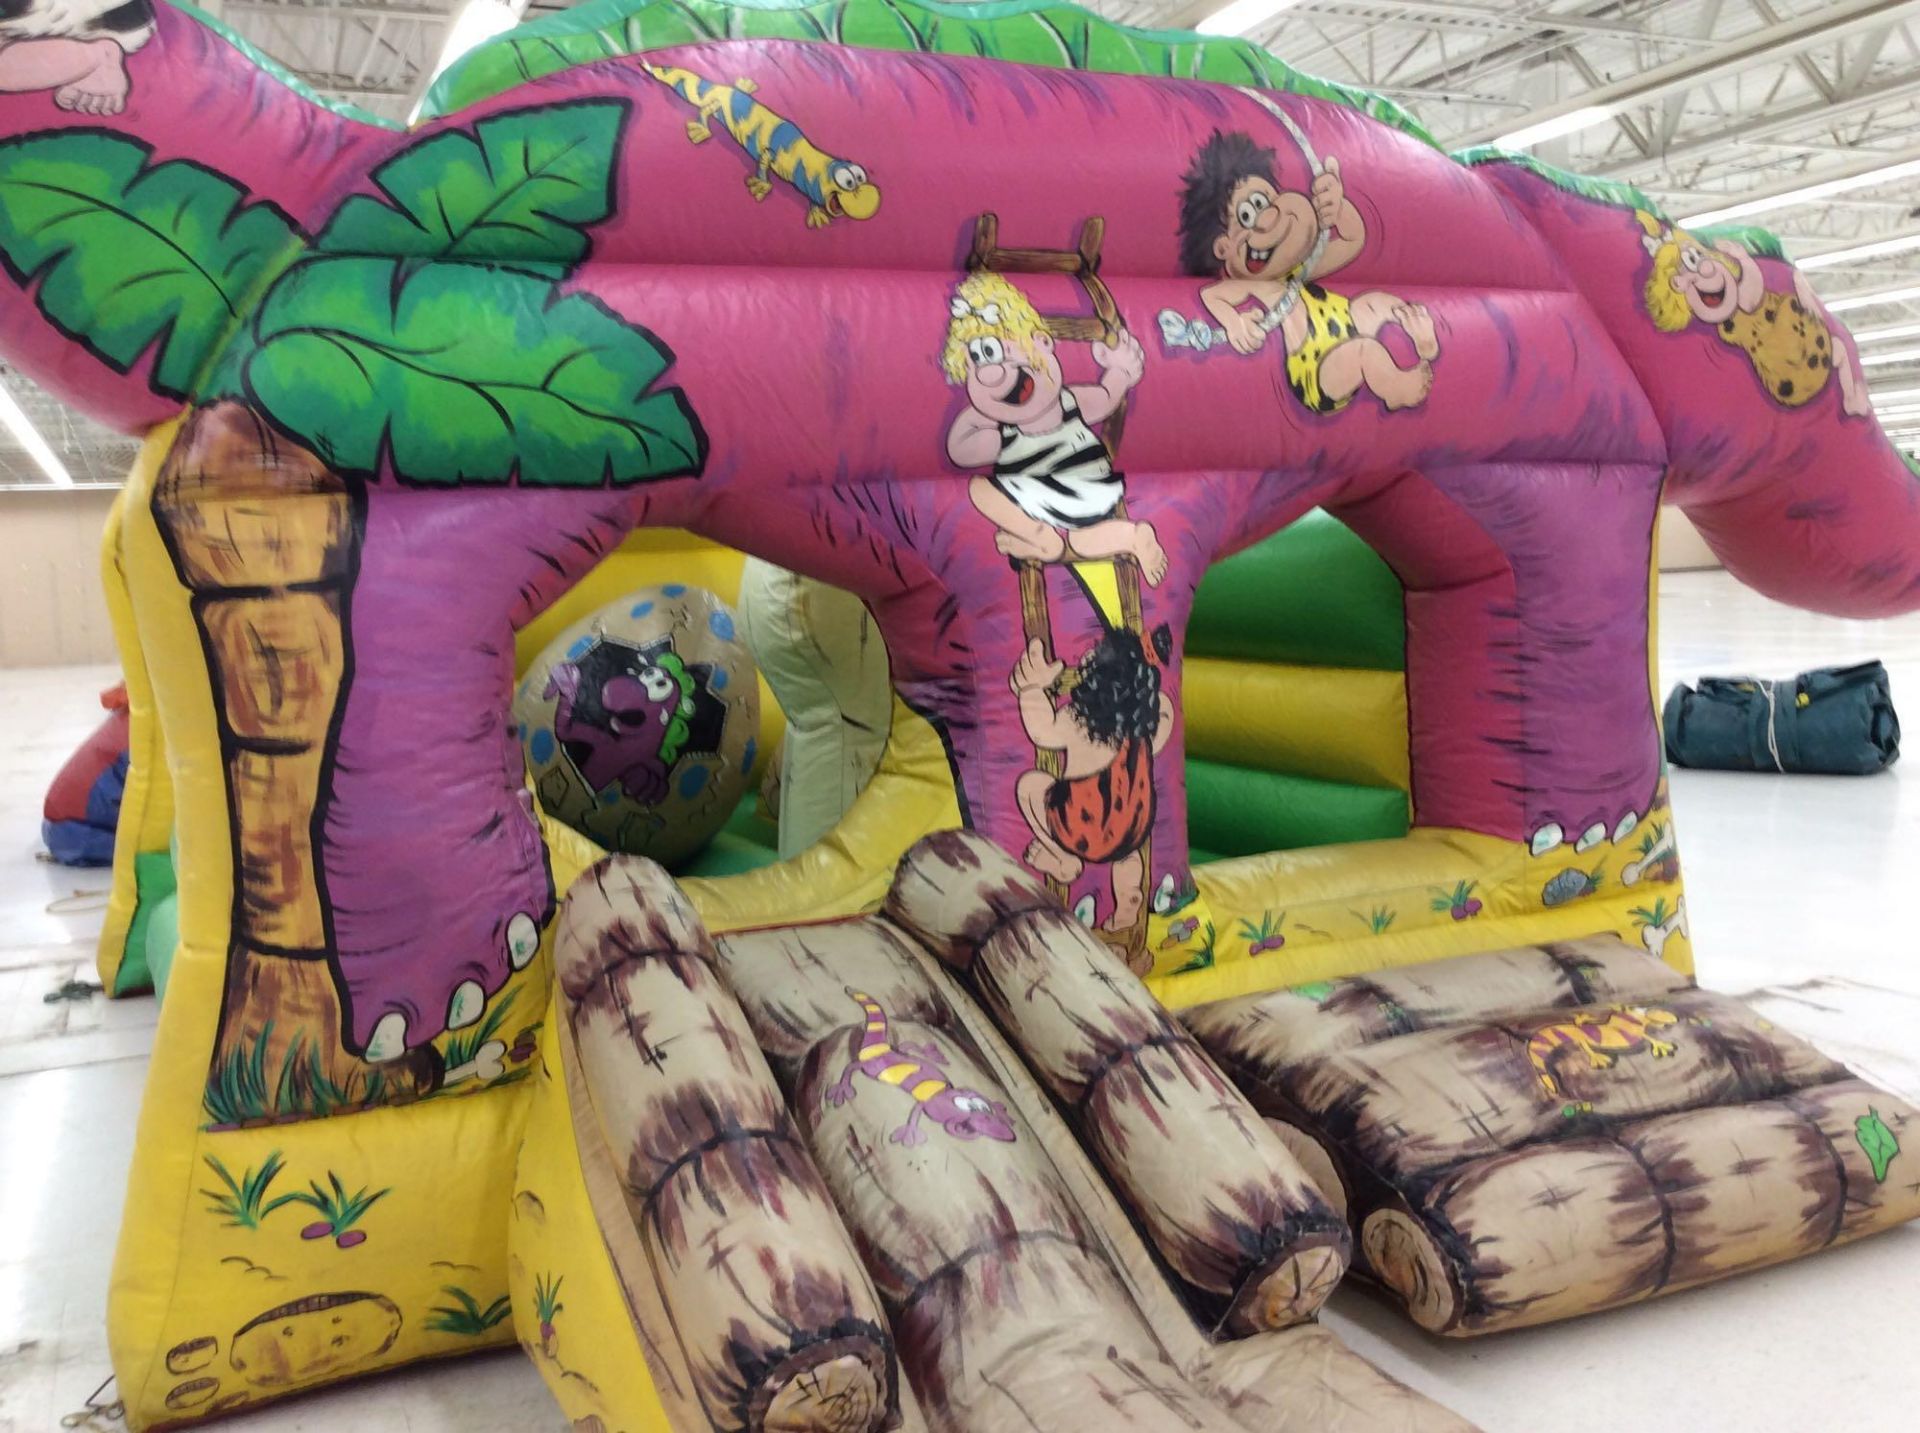 Bee-Tee brand Jurassic themed inflatable bounce house with blower, approx. 14' x 20' overall - Image 2 of 3